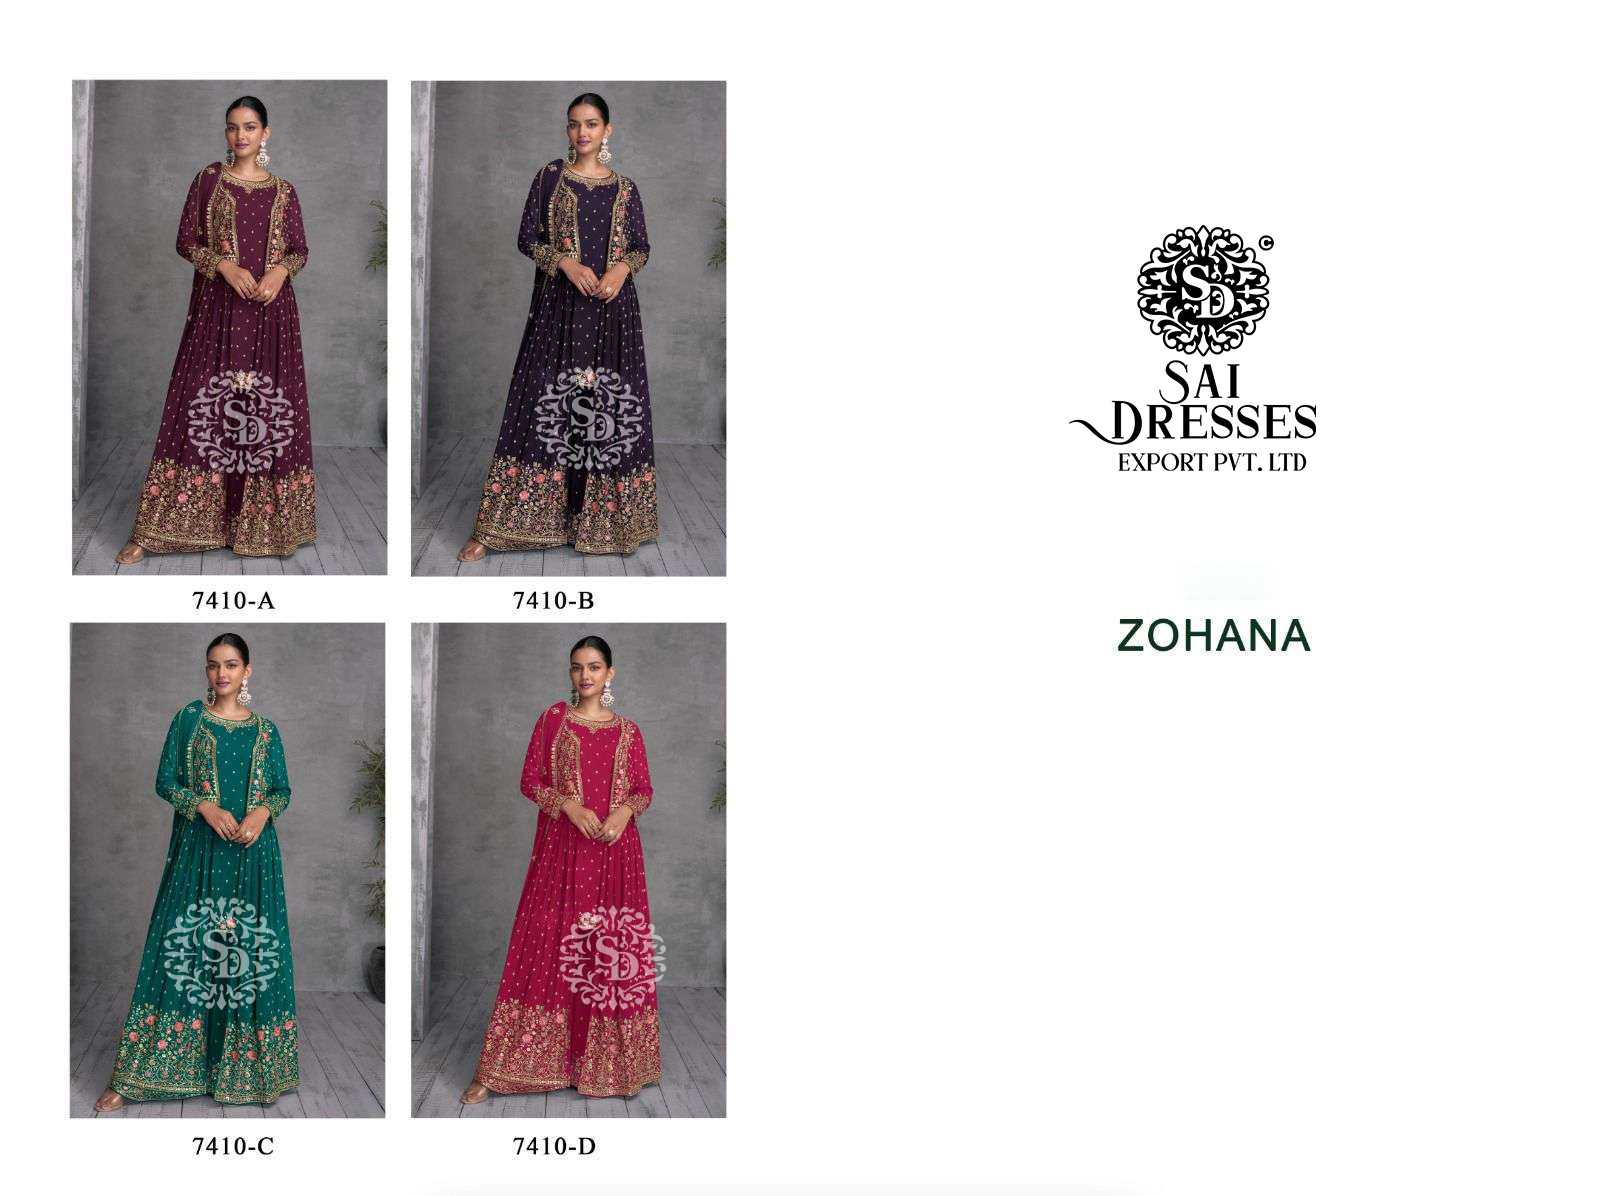 SAI DRESSES PRESENT ZOHANA READYMADE FESTIVAL WEAR LONG DESIGNER COLLECTION IN WHOLESALE RATE IN SURAT